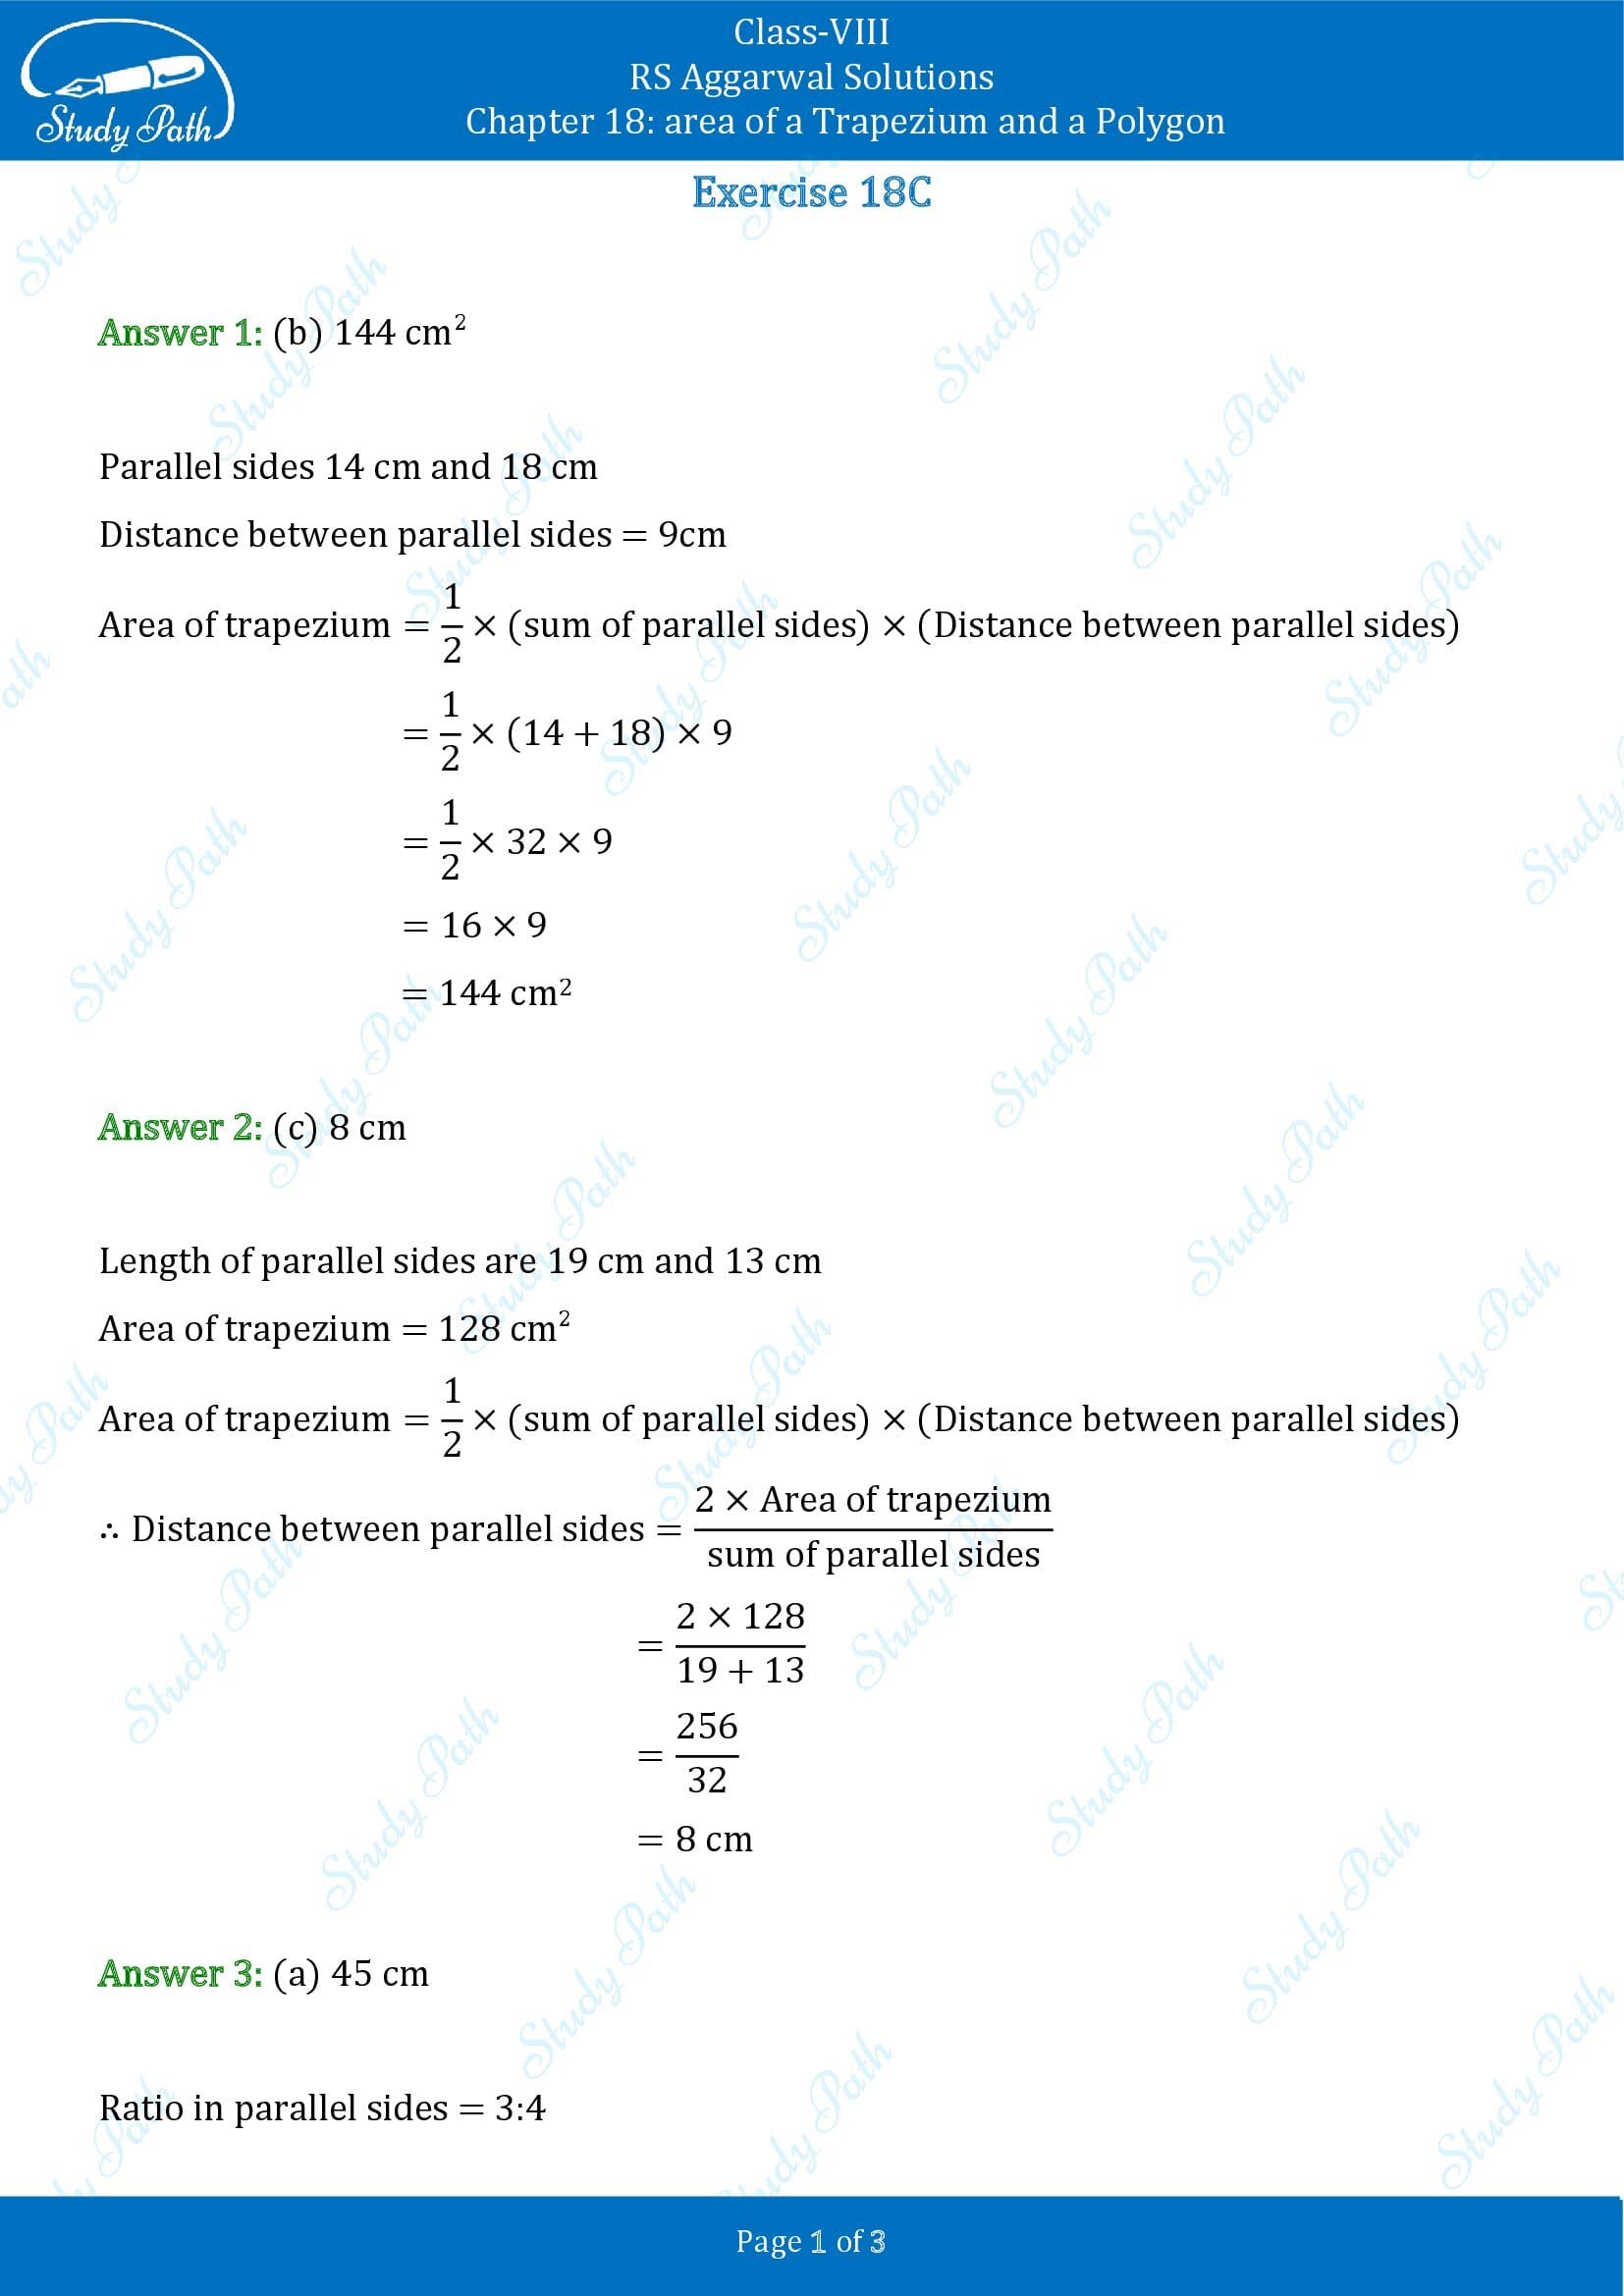 RS Aggarwal Solutions Class 8 Chapter 18 Area of a Trapezium and a Polygon Exercise 18C MCQs 00001